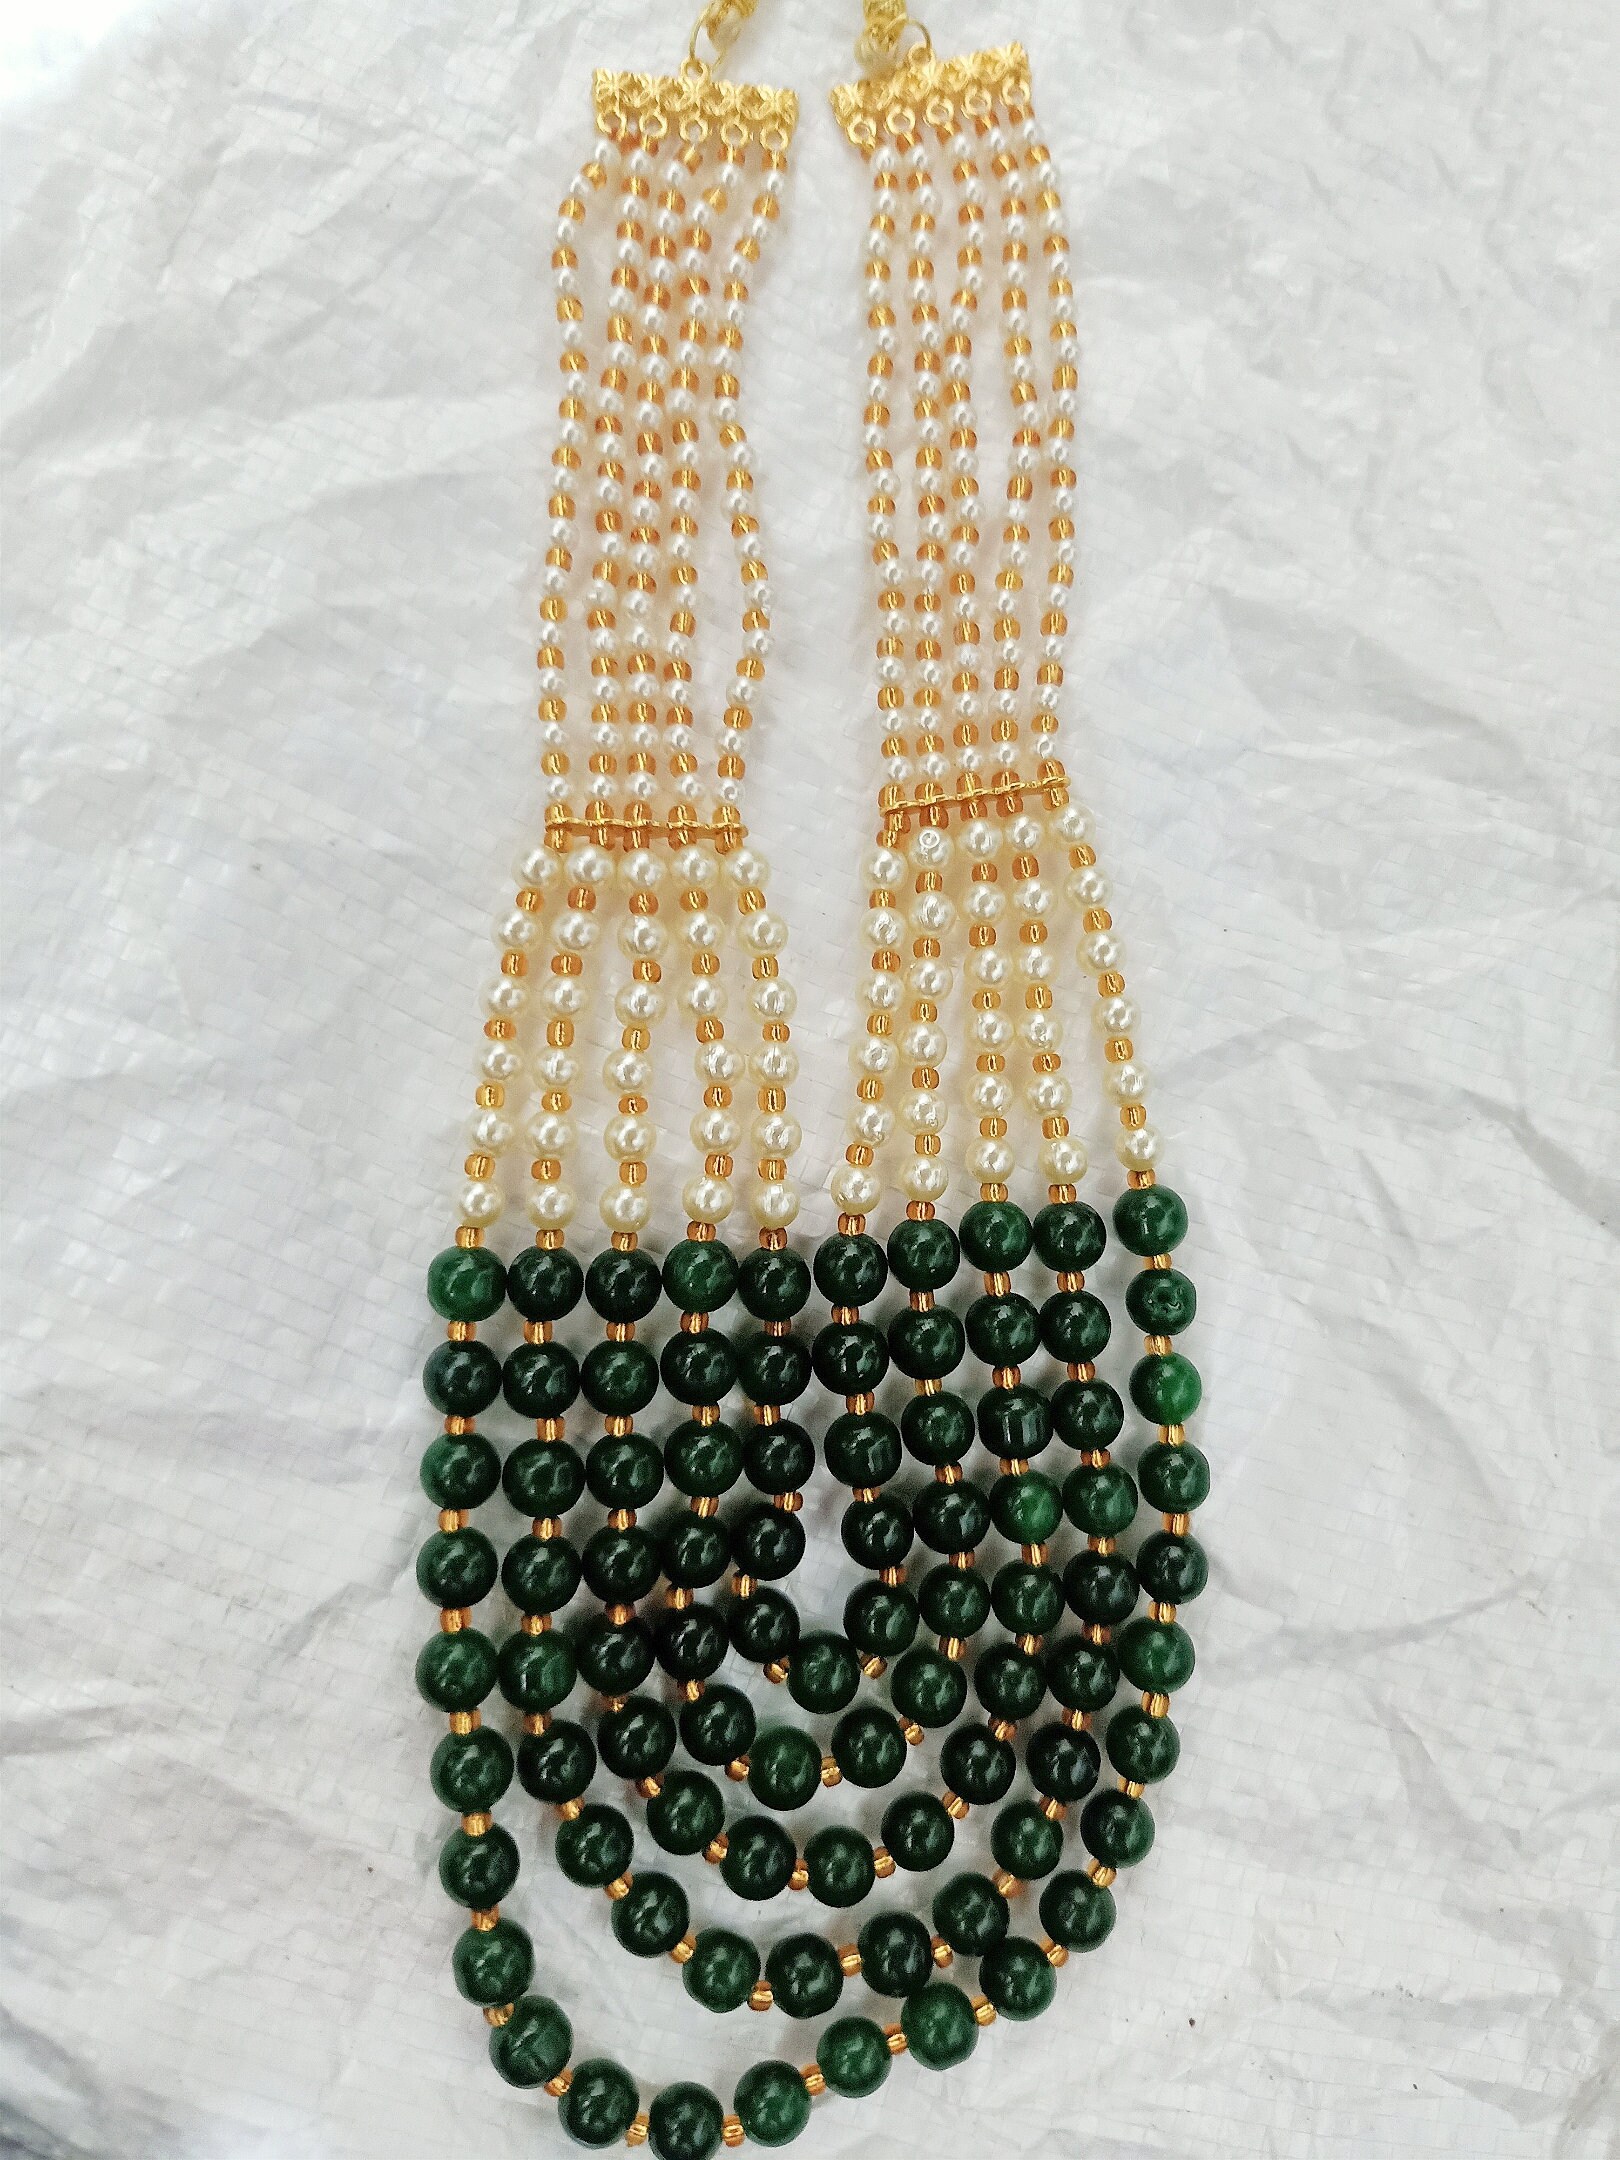 Vintage Pearl Beads Necklace With Green Moti Mala Strand 5 Line India | Save 33% - Rajasthan Living 18